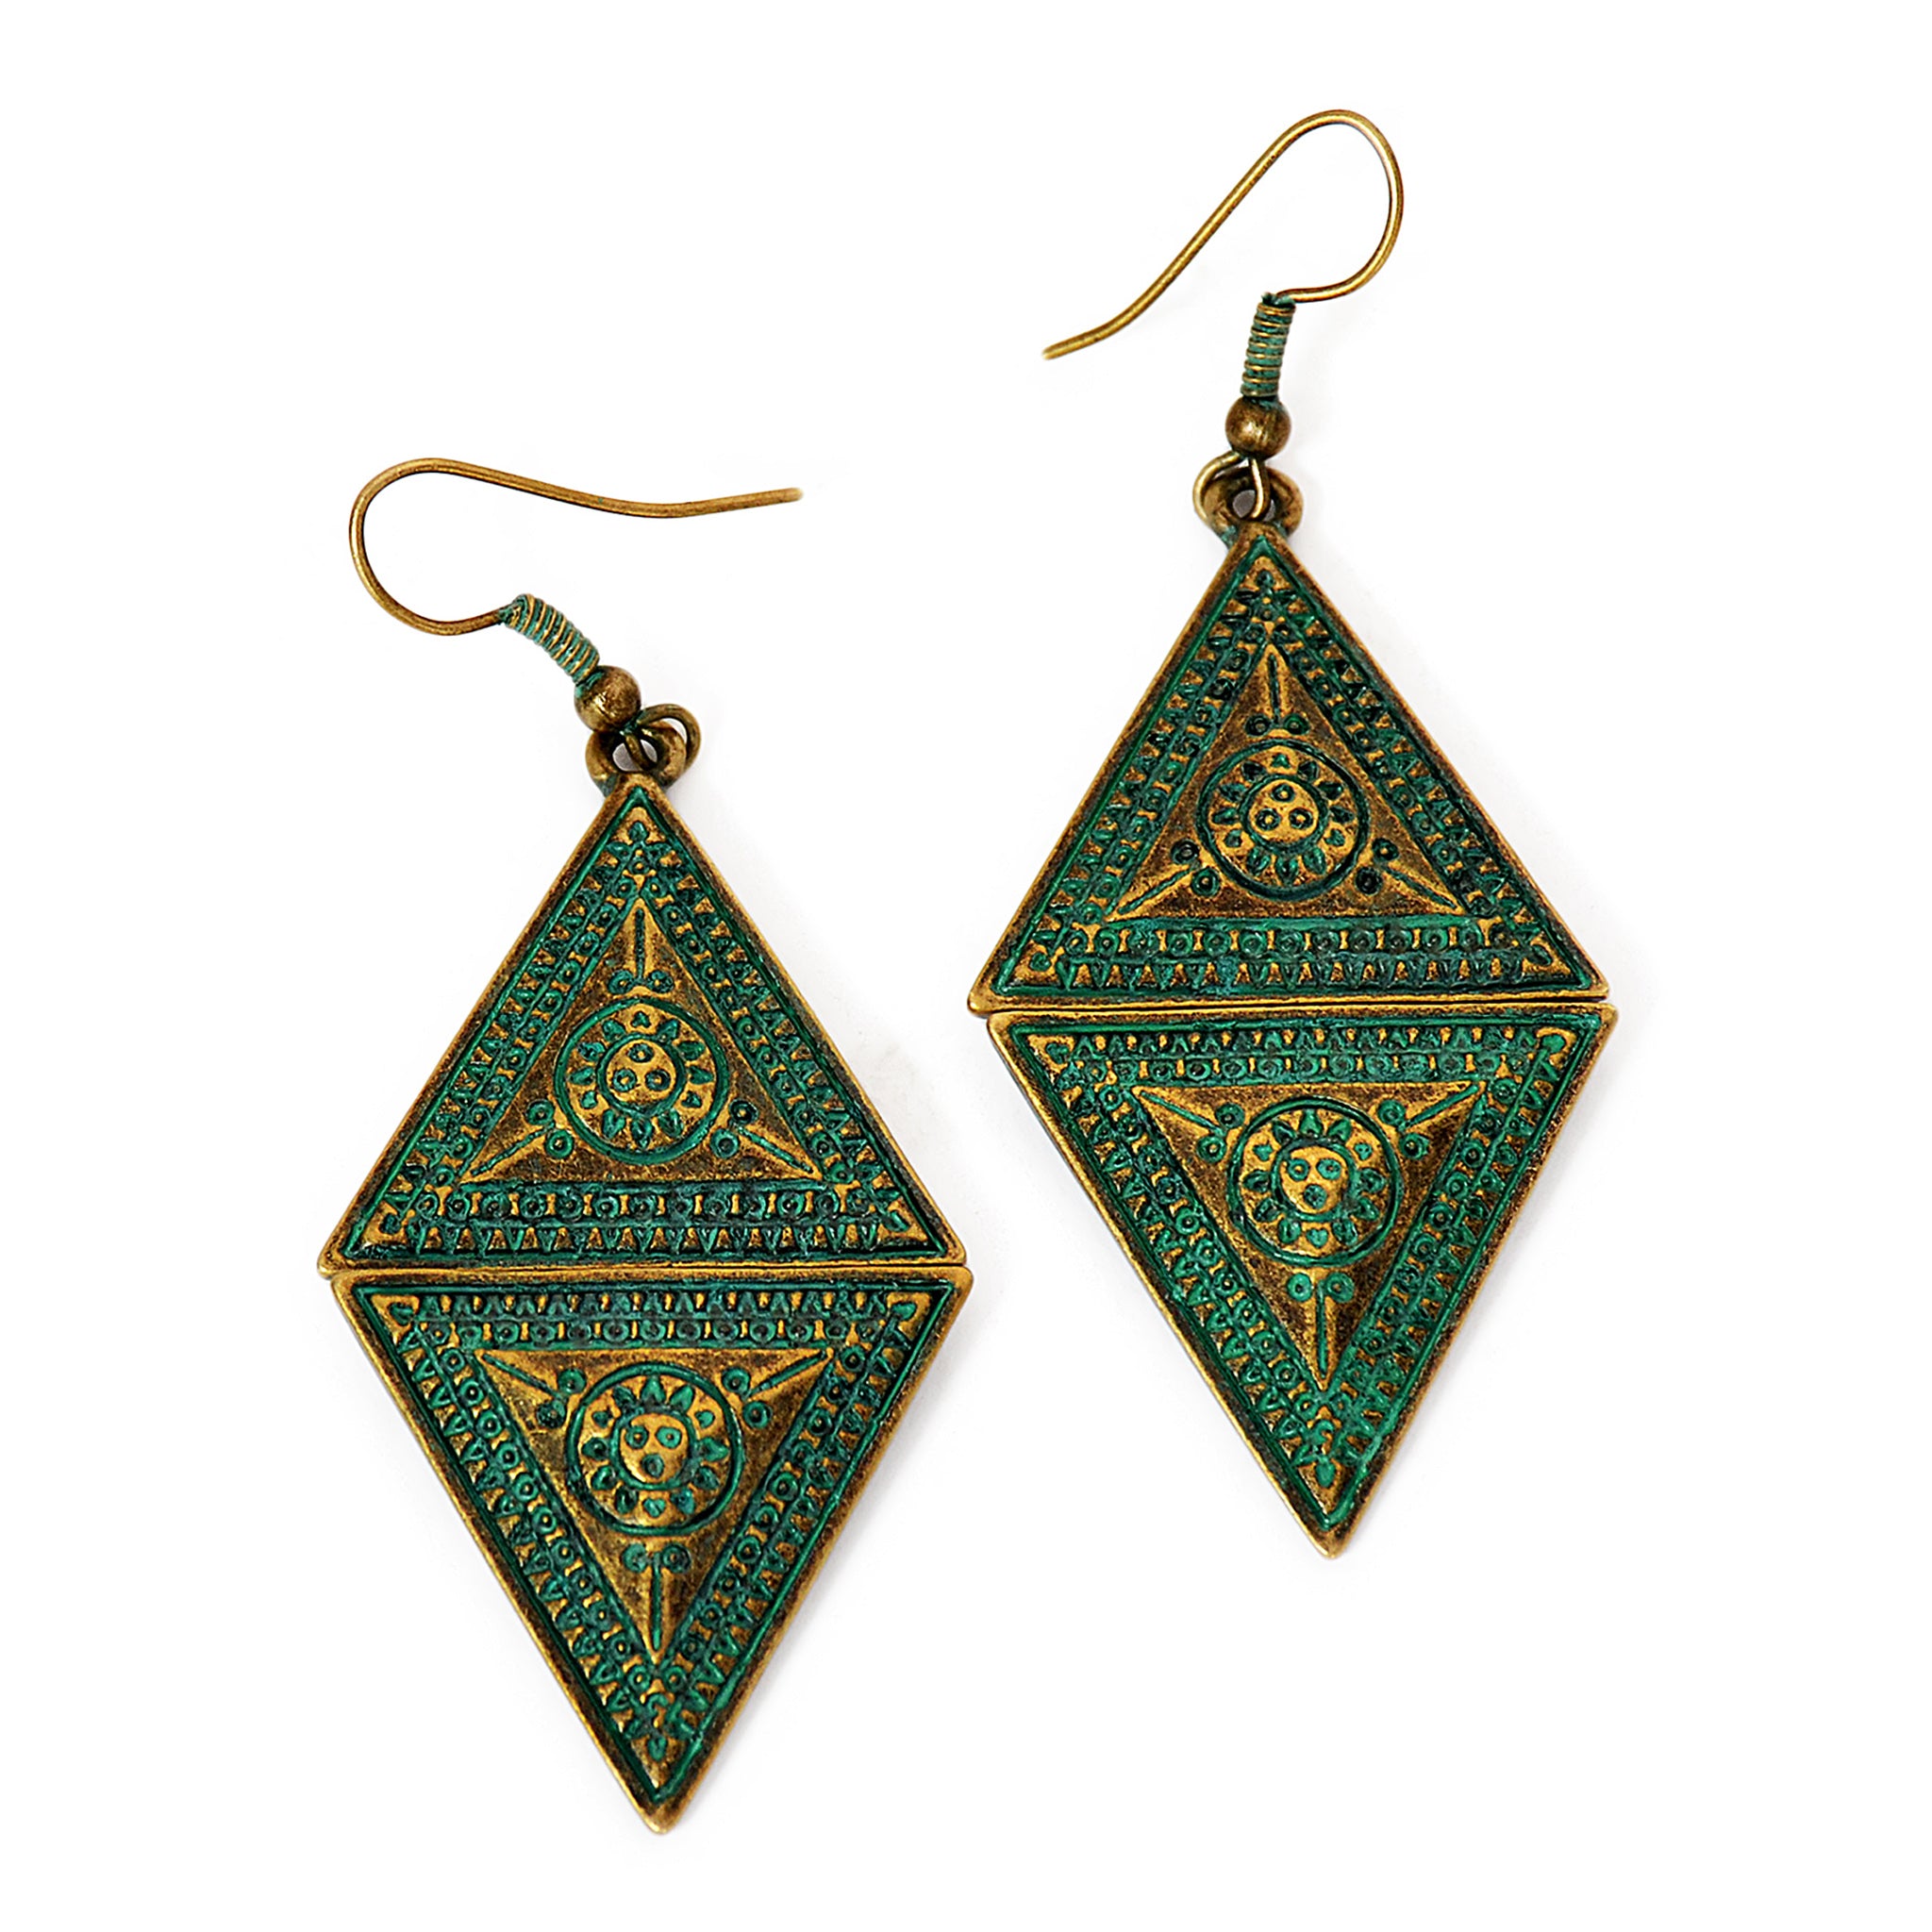 Dangly triangle earrings with tribal aztec design and green patina on brass